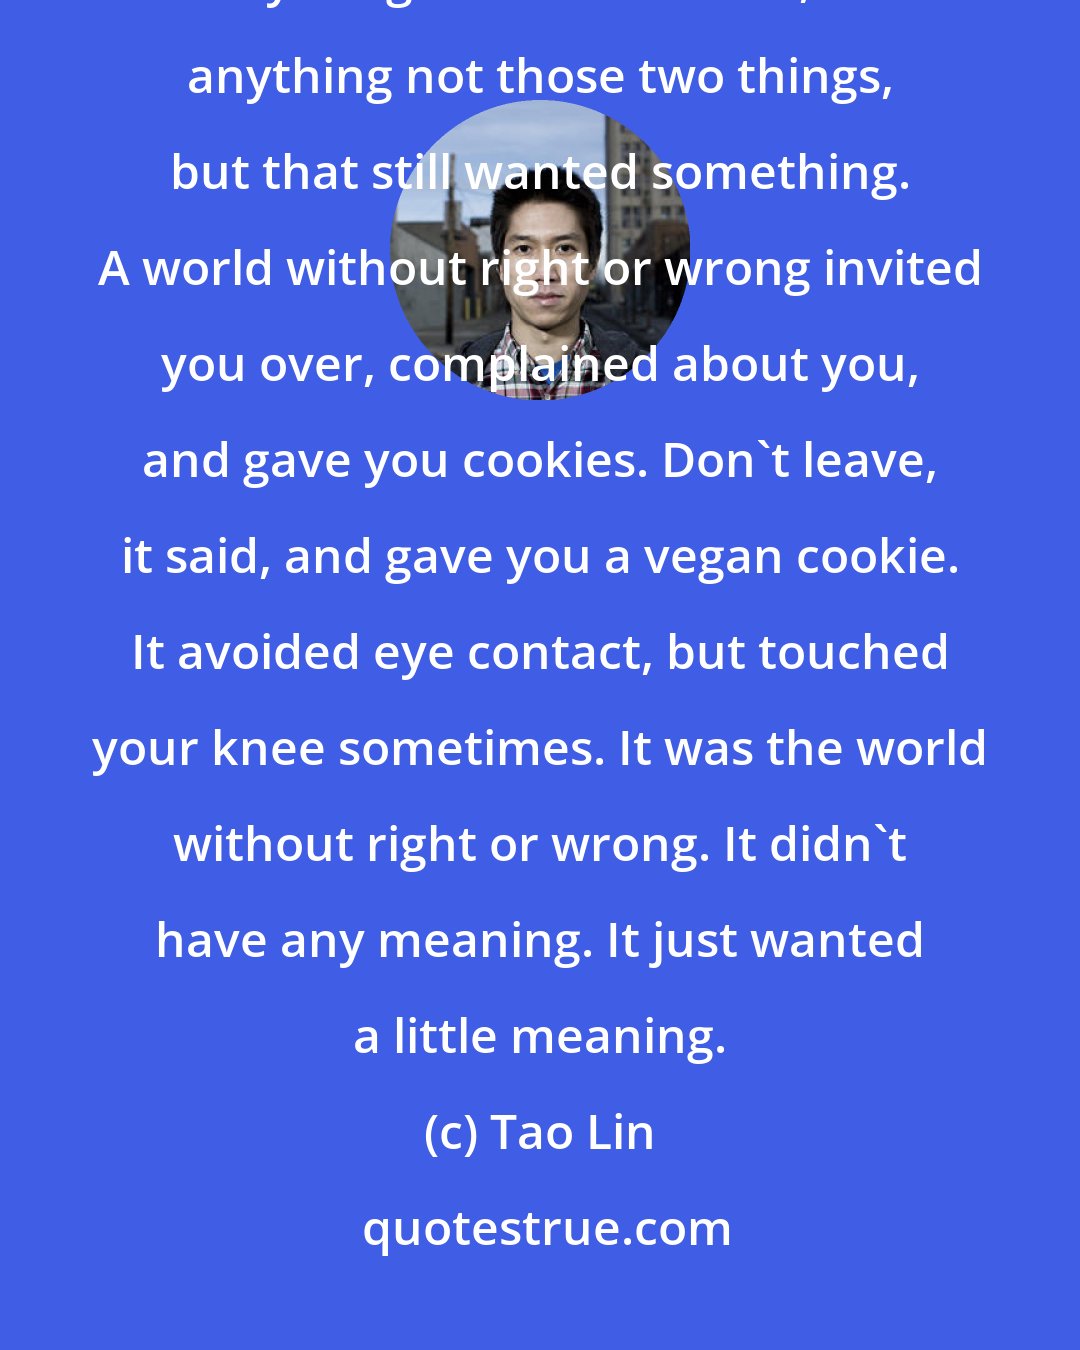 Tao Lin: A world without right or wrong was a world that did not want itself, anything other than itself, or anything not those two things, but that still wanted something. A world without right or wrong invited you over, complained about you, and gave you cookies. Don't leave, it said, and gave you a vegan cookie. It avoided eye contact, but touched your knee sometimes. It was the world without right or wrong. It didn't have any meaning. It just wanted a little meaning.